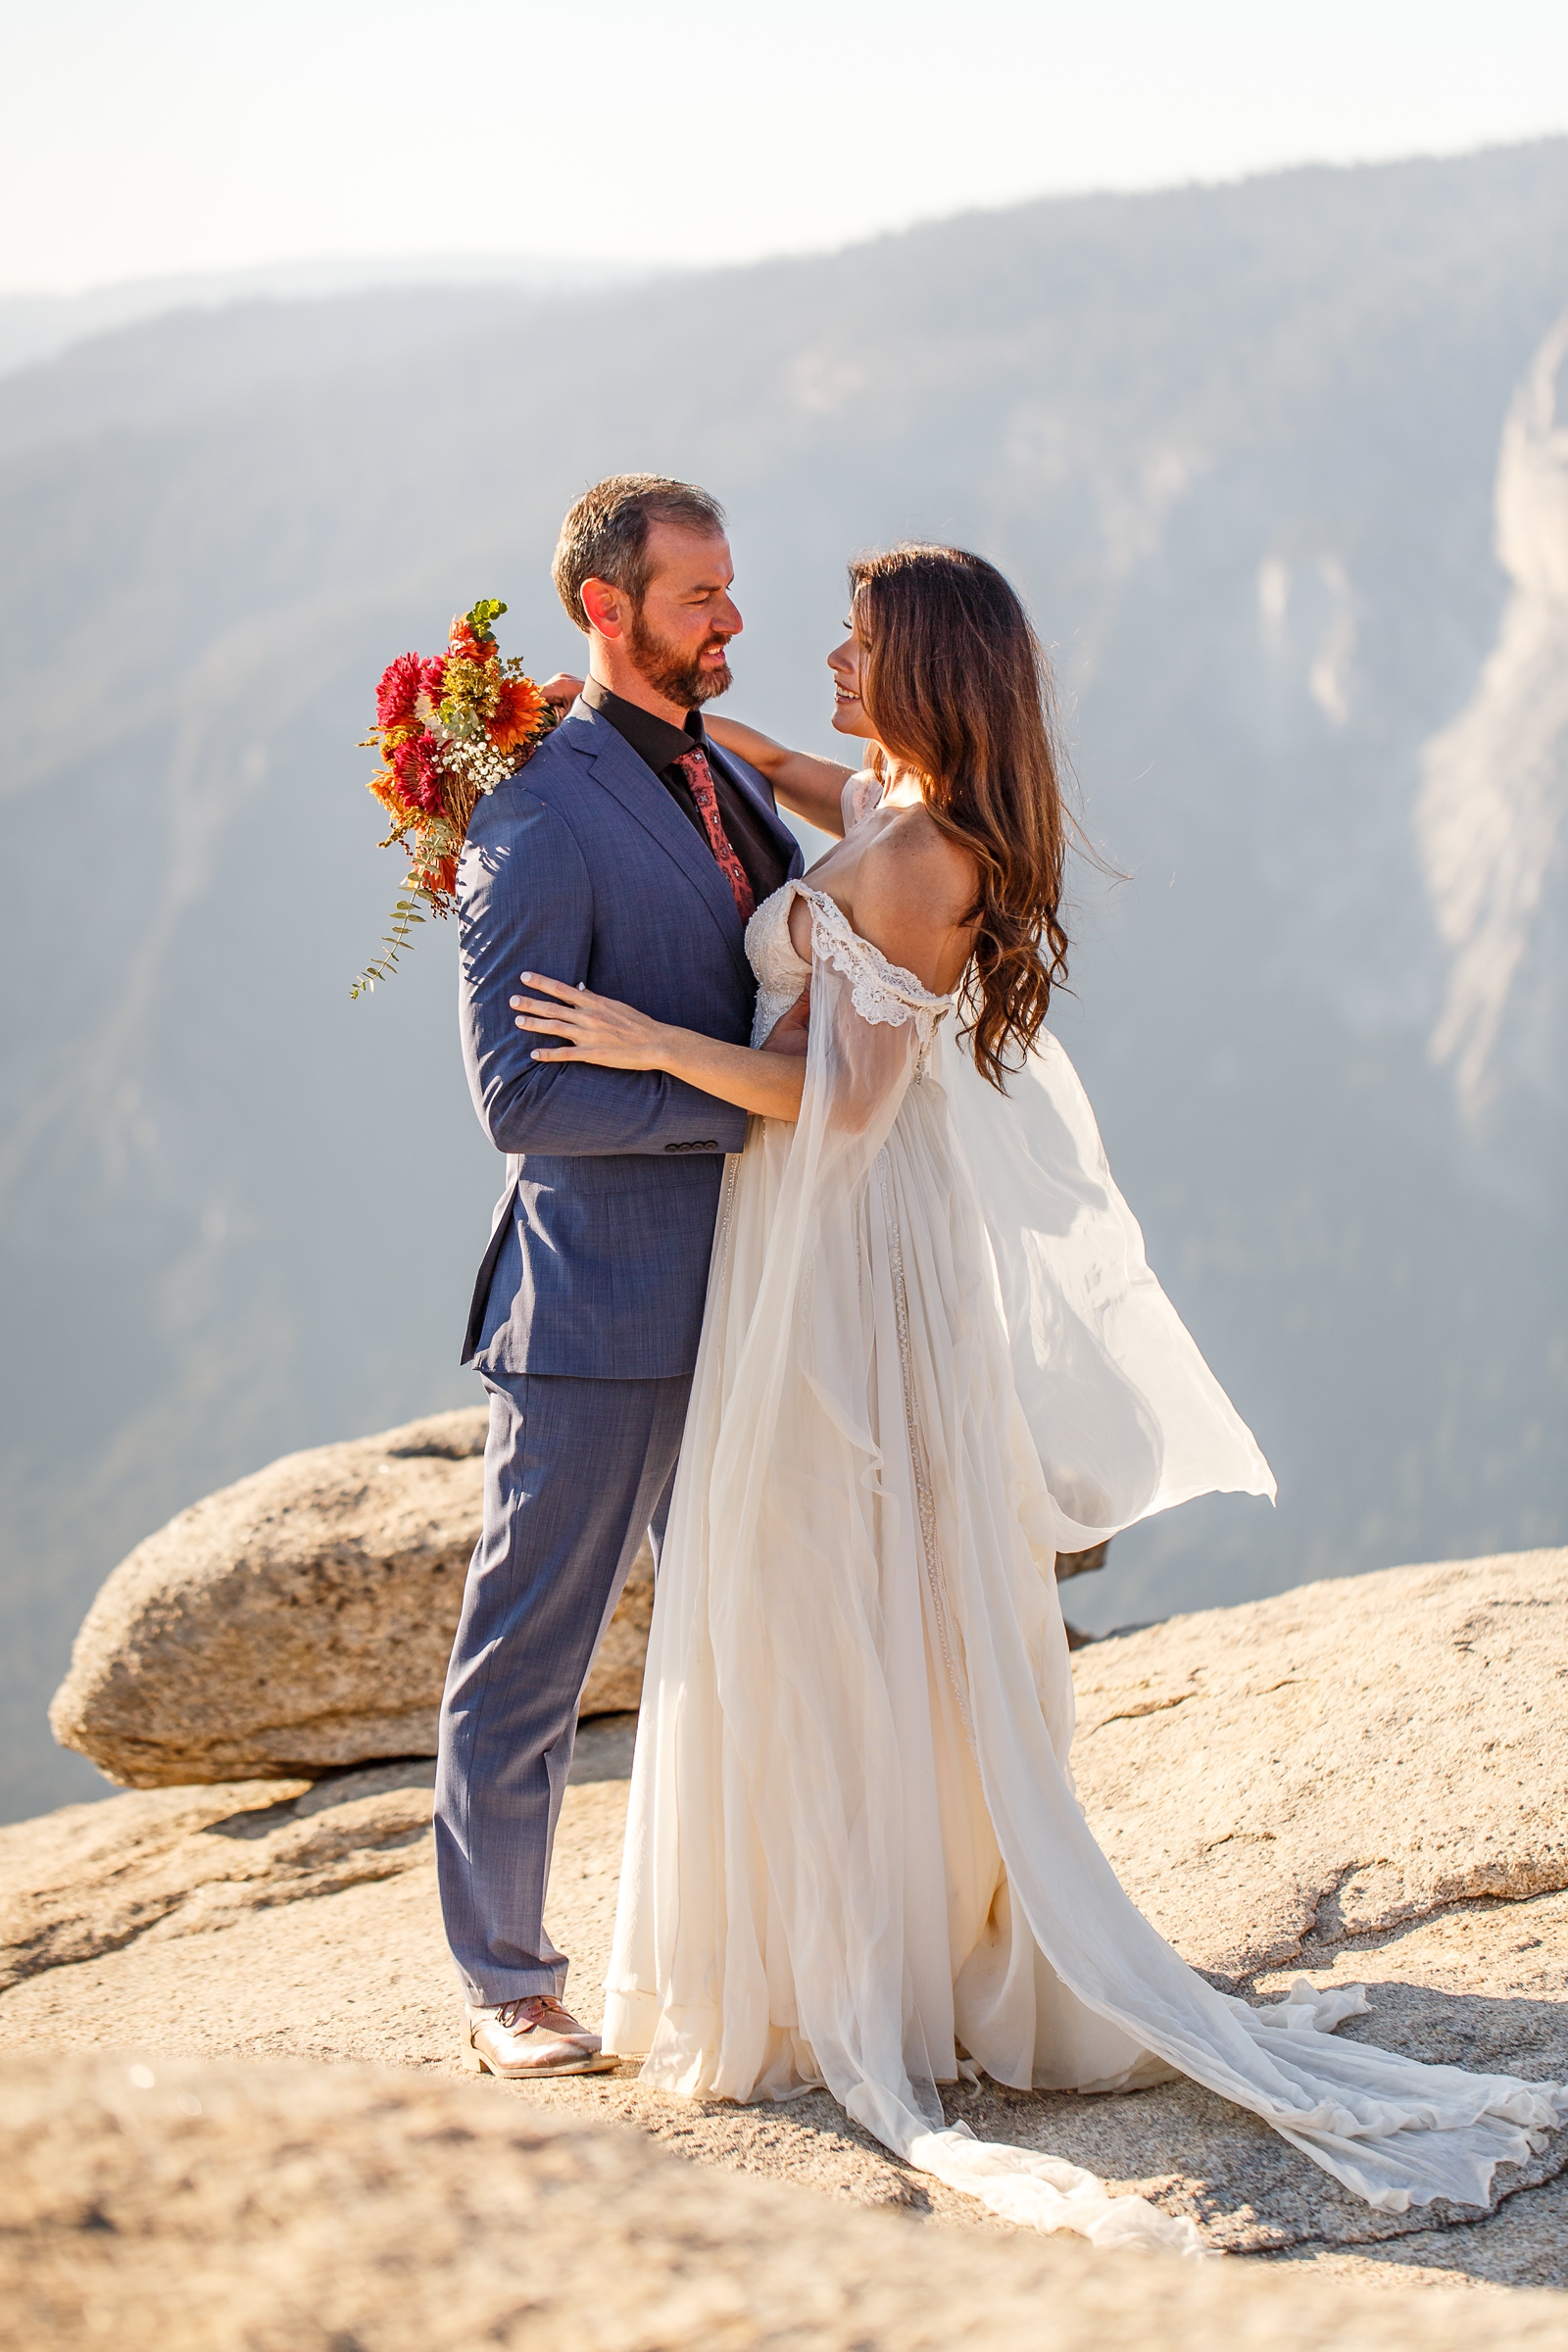 Bride and groom dancing at their cliffside Yosemite elopement.